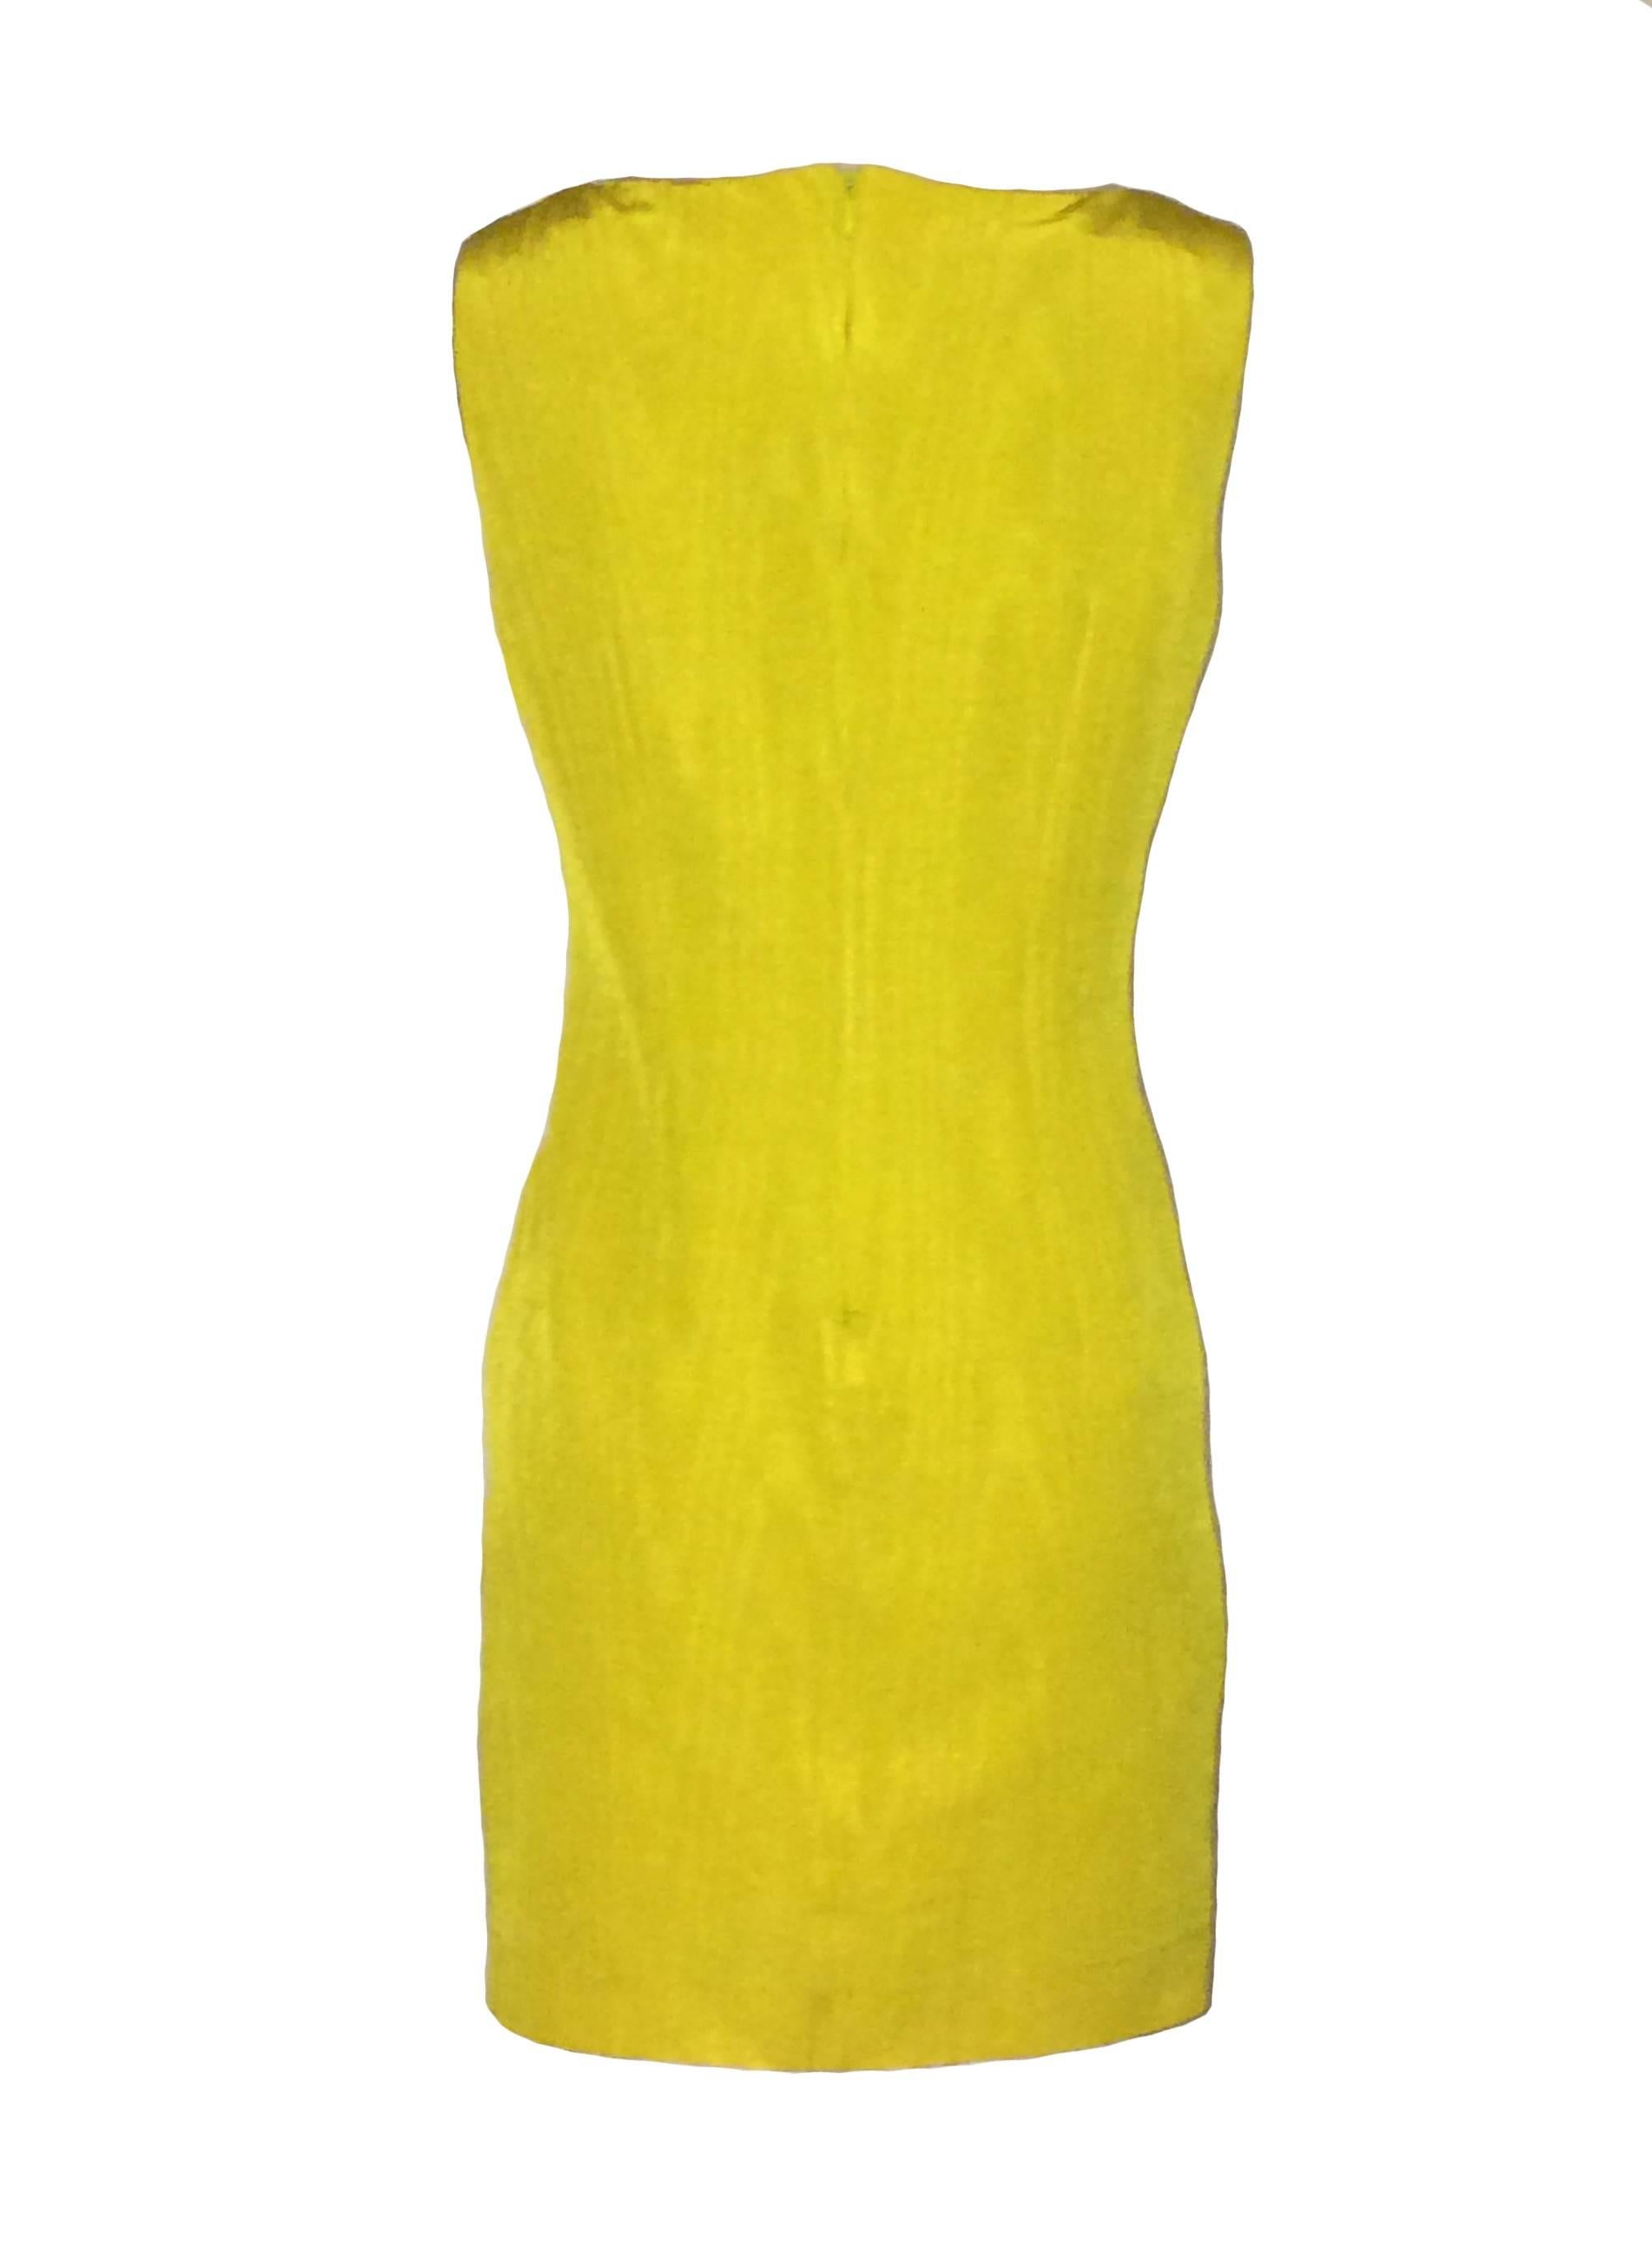 Moschino Cheap & Chic 1990s yellow shift dress in a moire print. Grosgrain-like fabric.  Back zip.

54% cotton, 46% acetate. 
Fully lined in 60% acetate, 40% rayon.

Size IT 46, US 12. Fits like modern 8, see measurements.
Bust 37